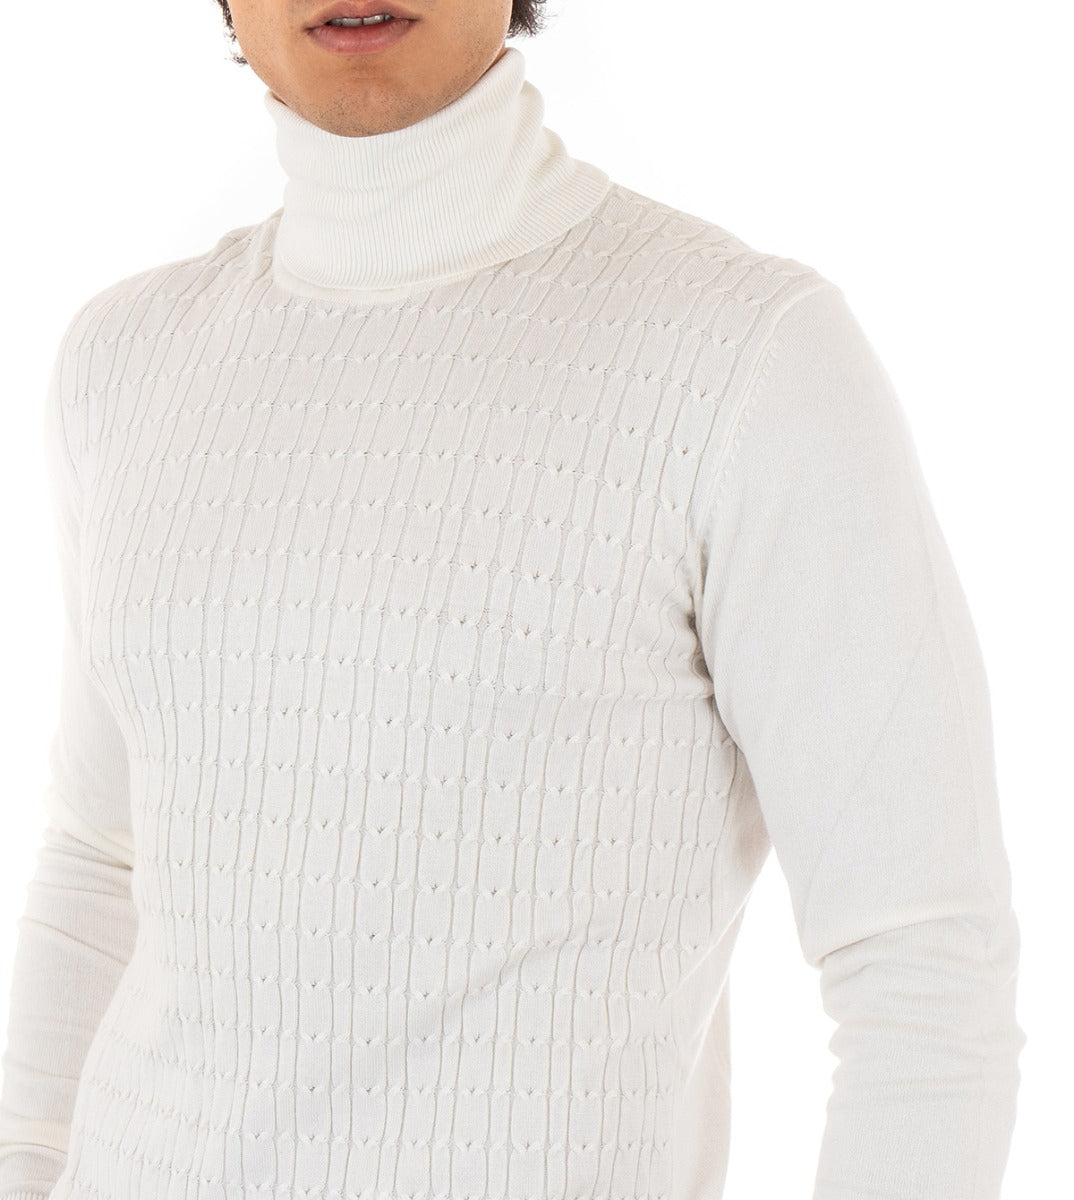 Men's Turtleneck Sweater Solid White Long Sleeves Sweater GIOSAL